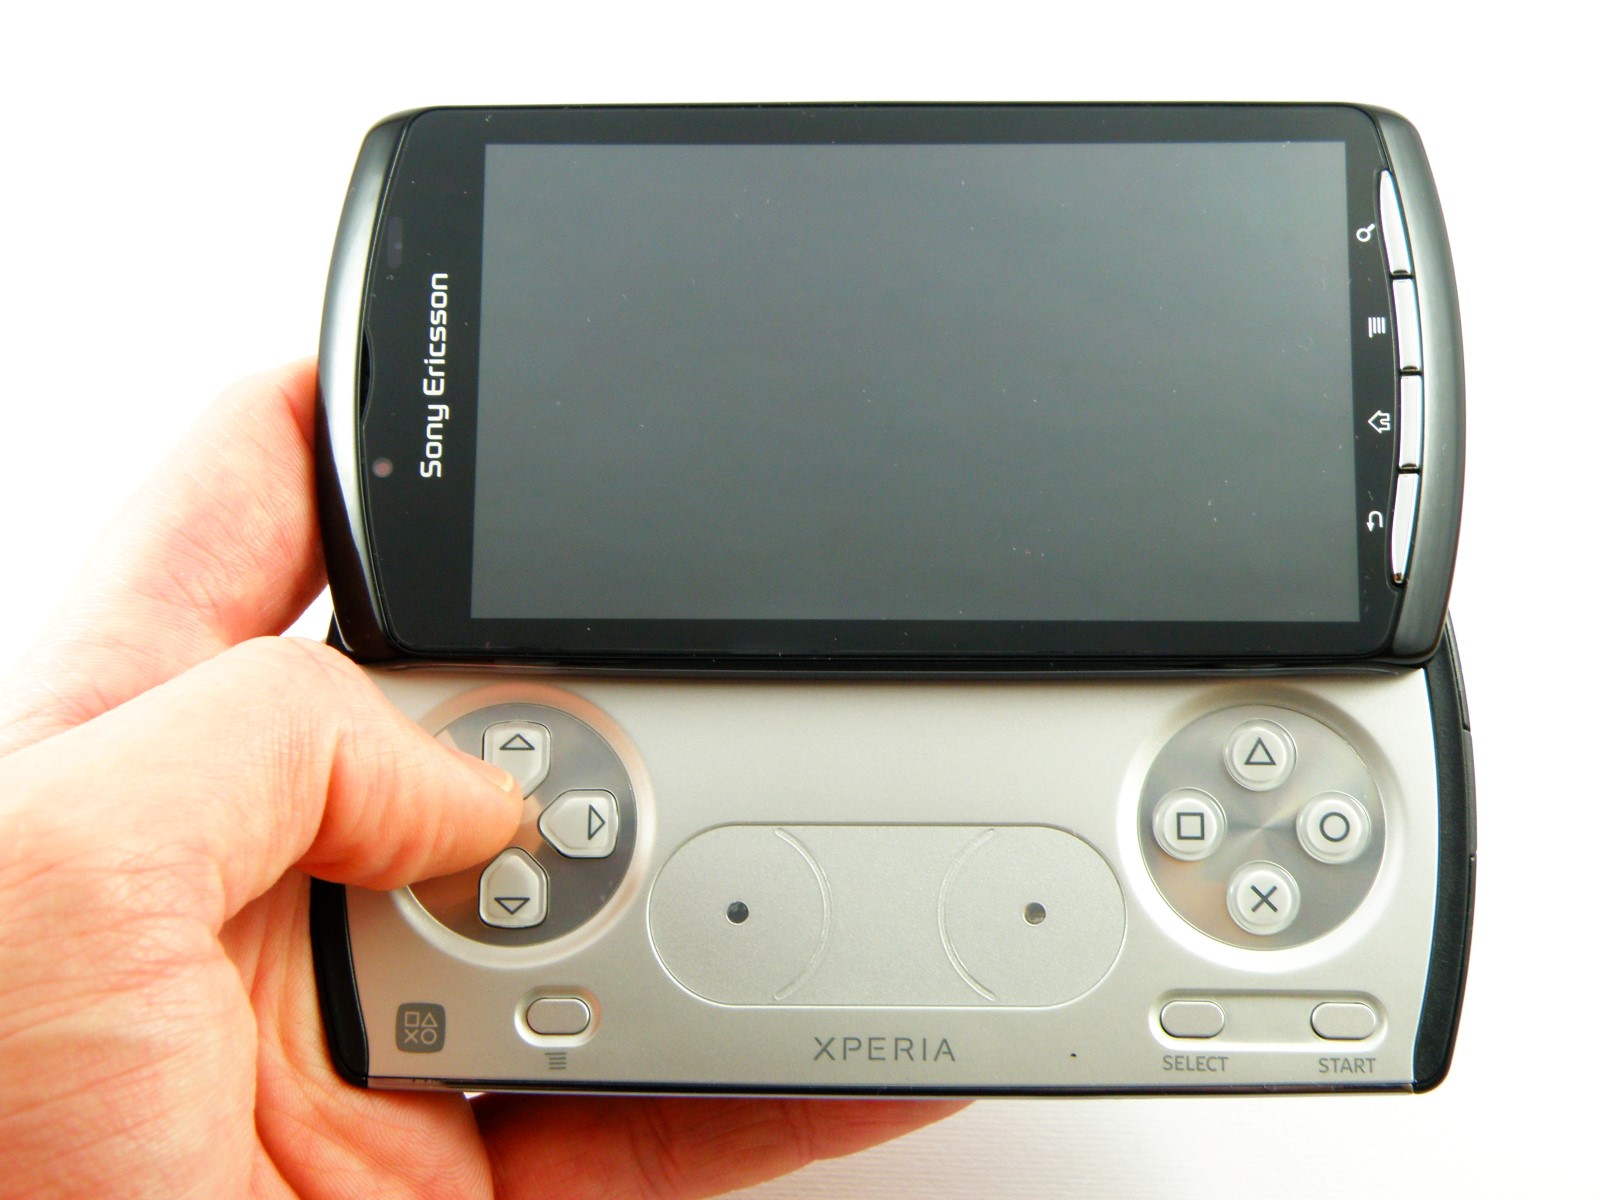 Bootloader Check On Xperia Play: A Step-by-Step Guide